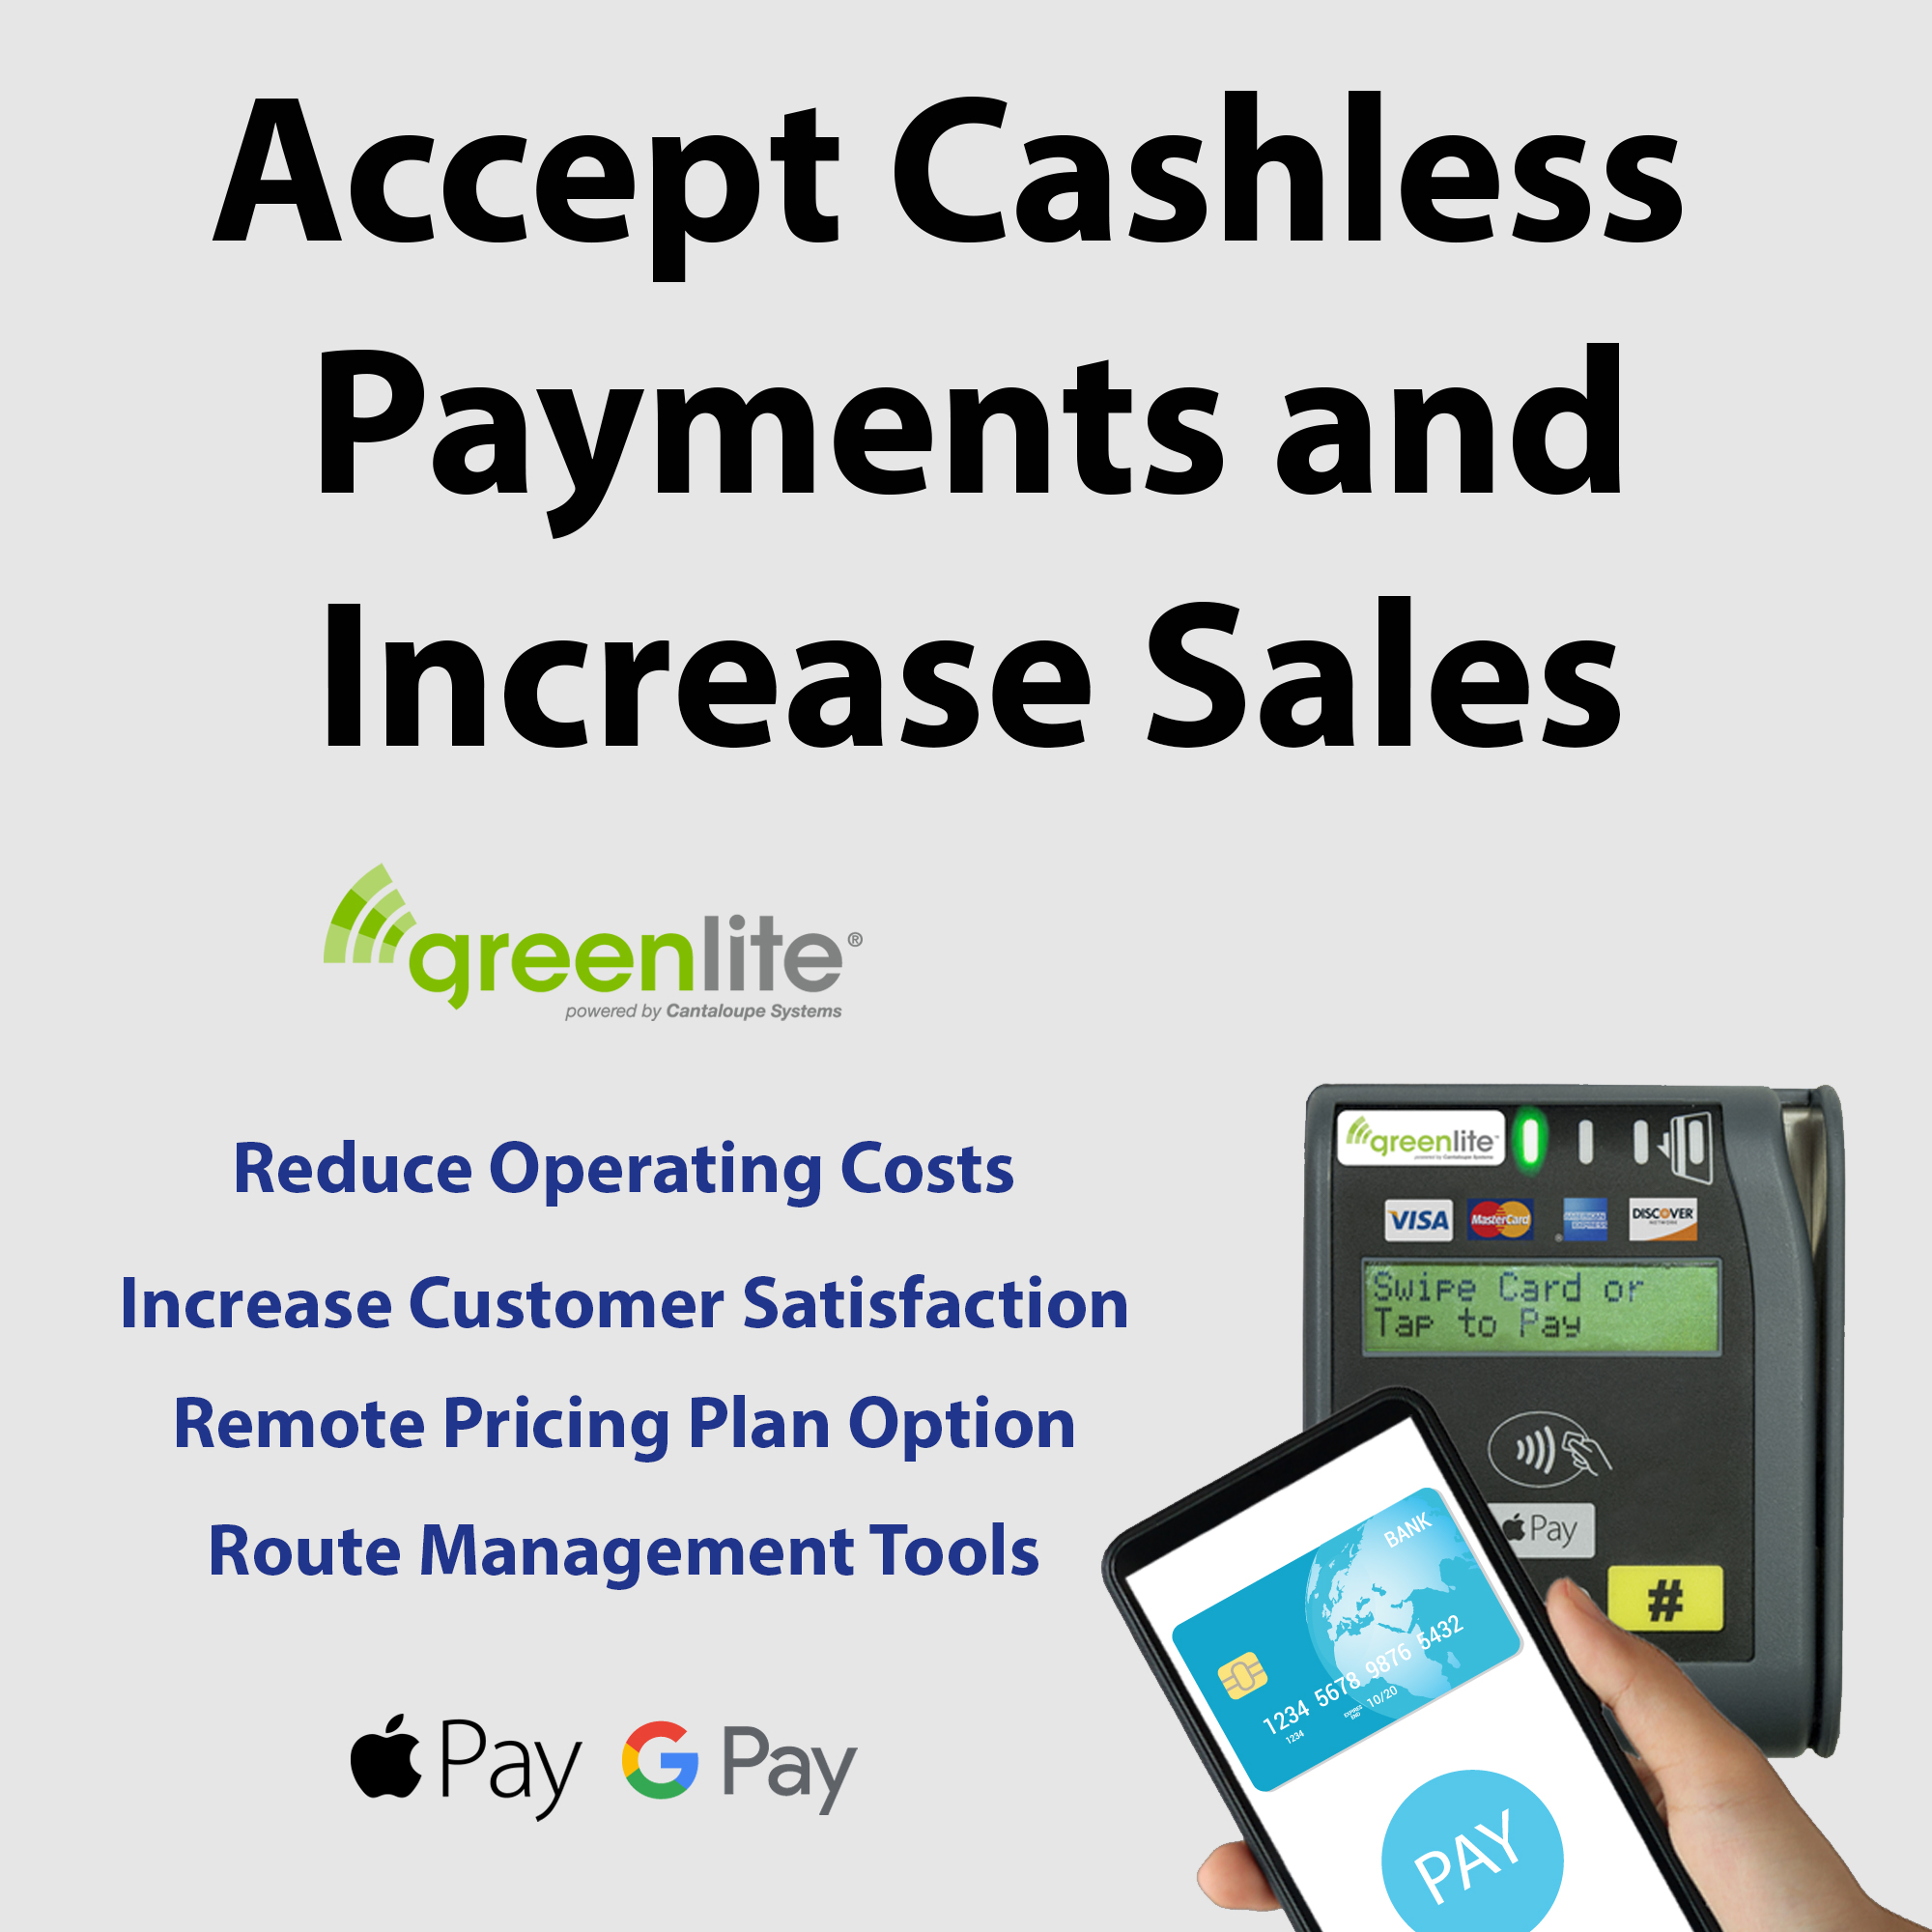 Accept cashless payments and increase sales by adding a Greenlite cashless cardreader to your vending machine.